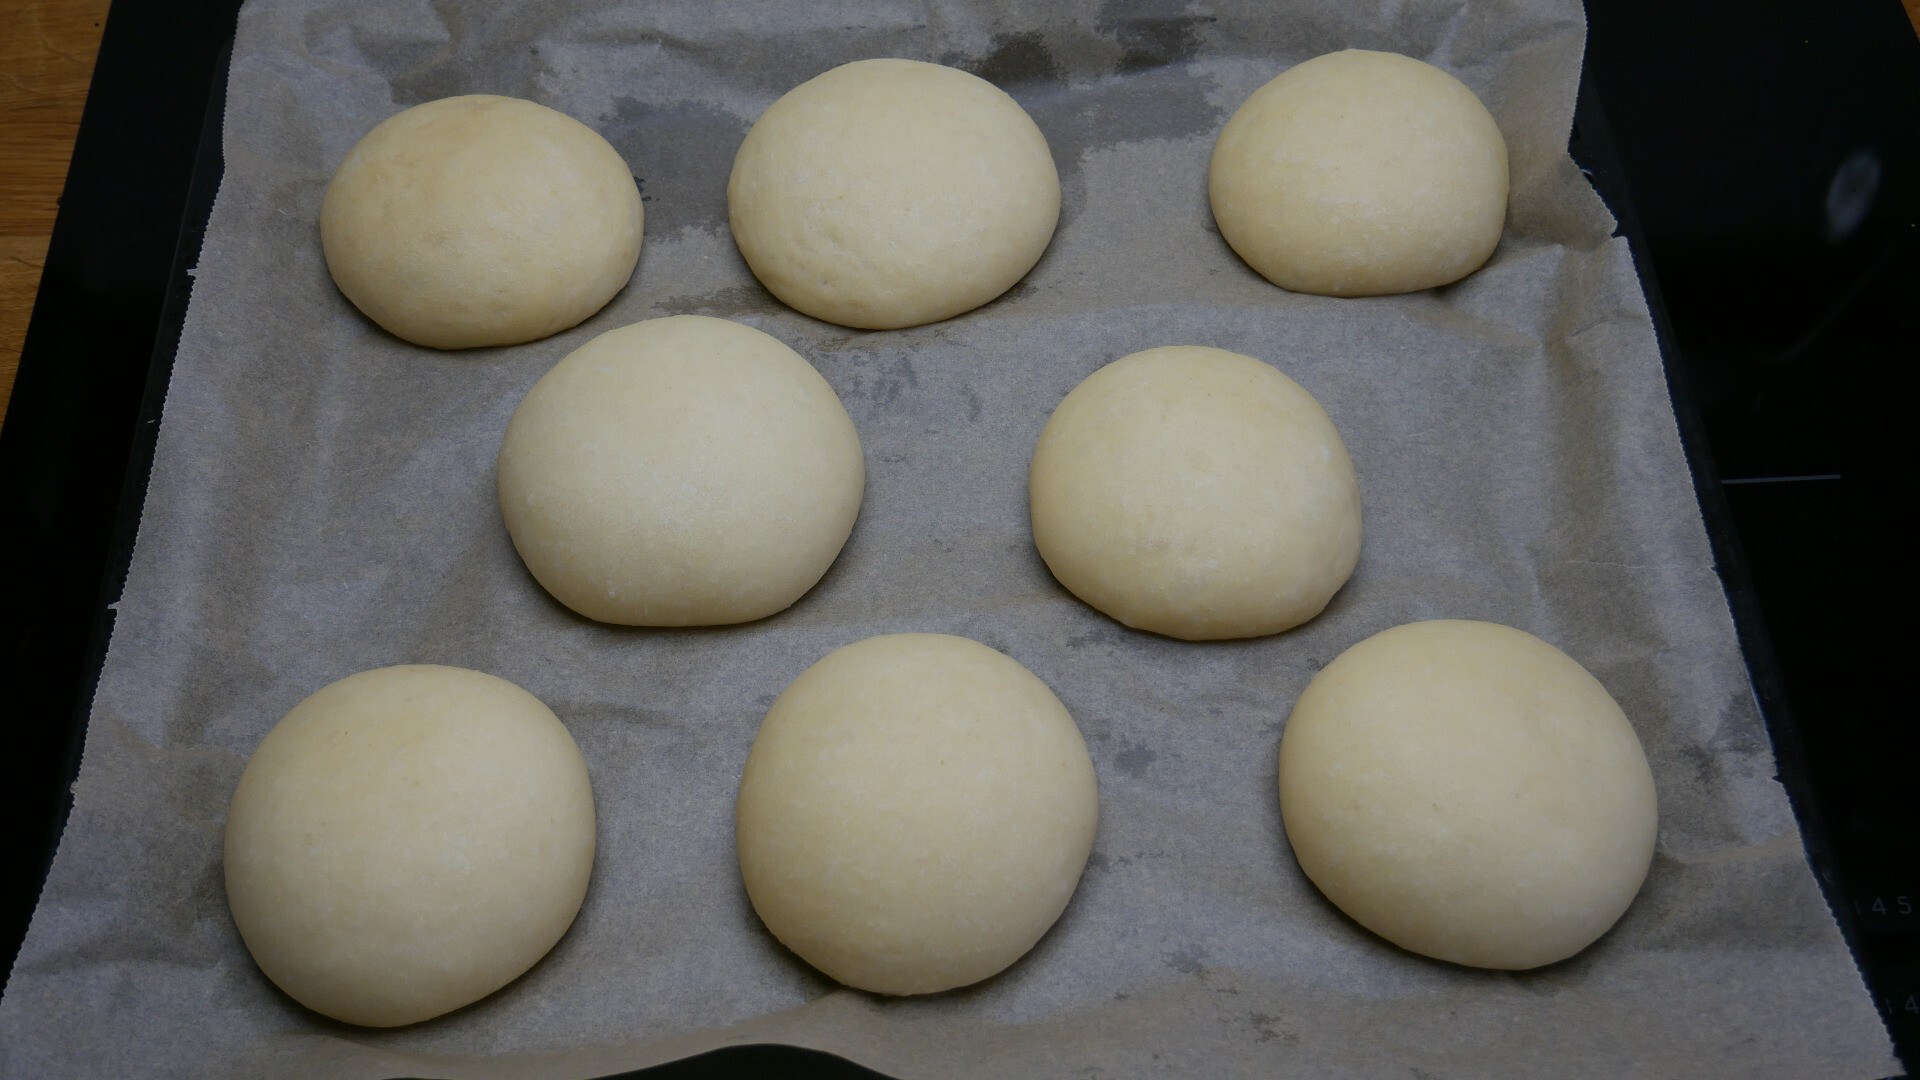 balls of yeast dough on a baking tray after proving